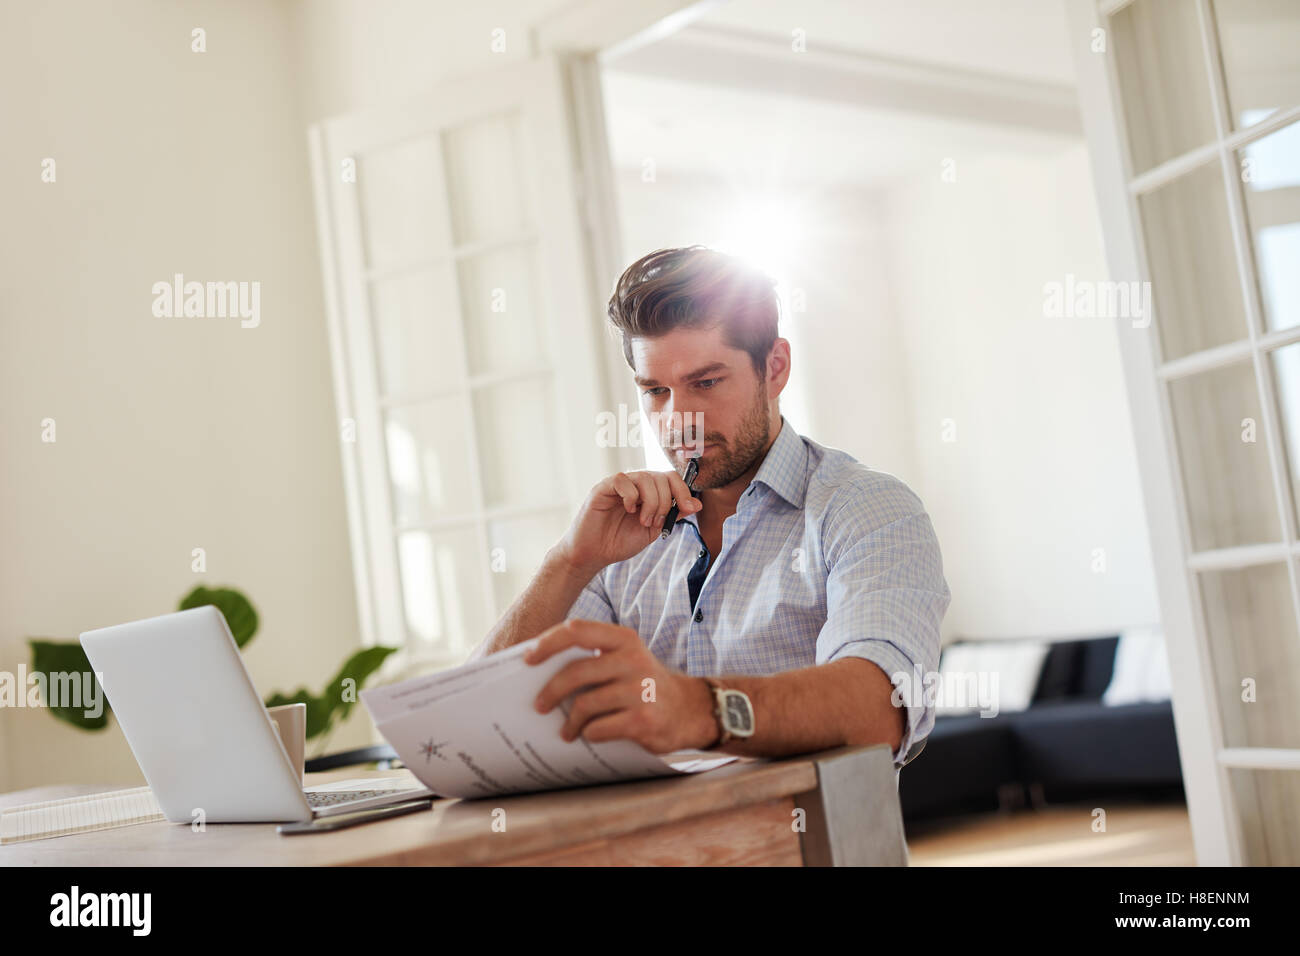 Shot of young man sitting at table with laptop and reading documents. Handsome business man working from home office. Stock Photo